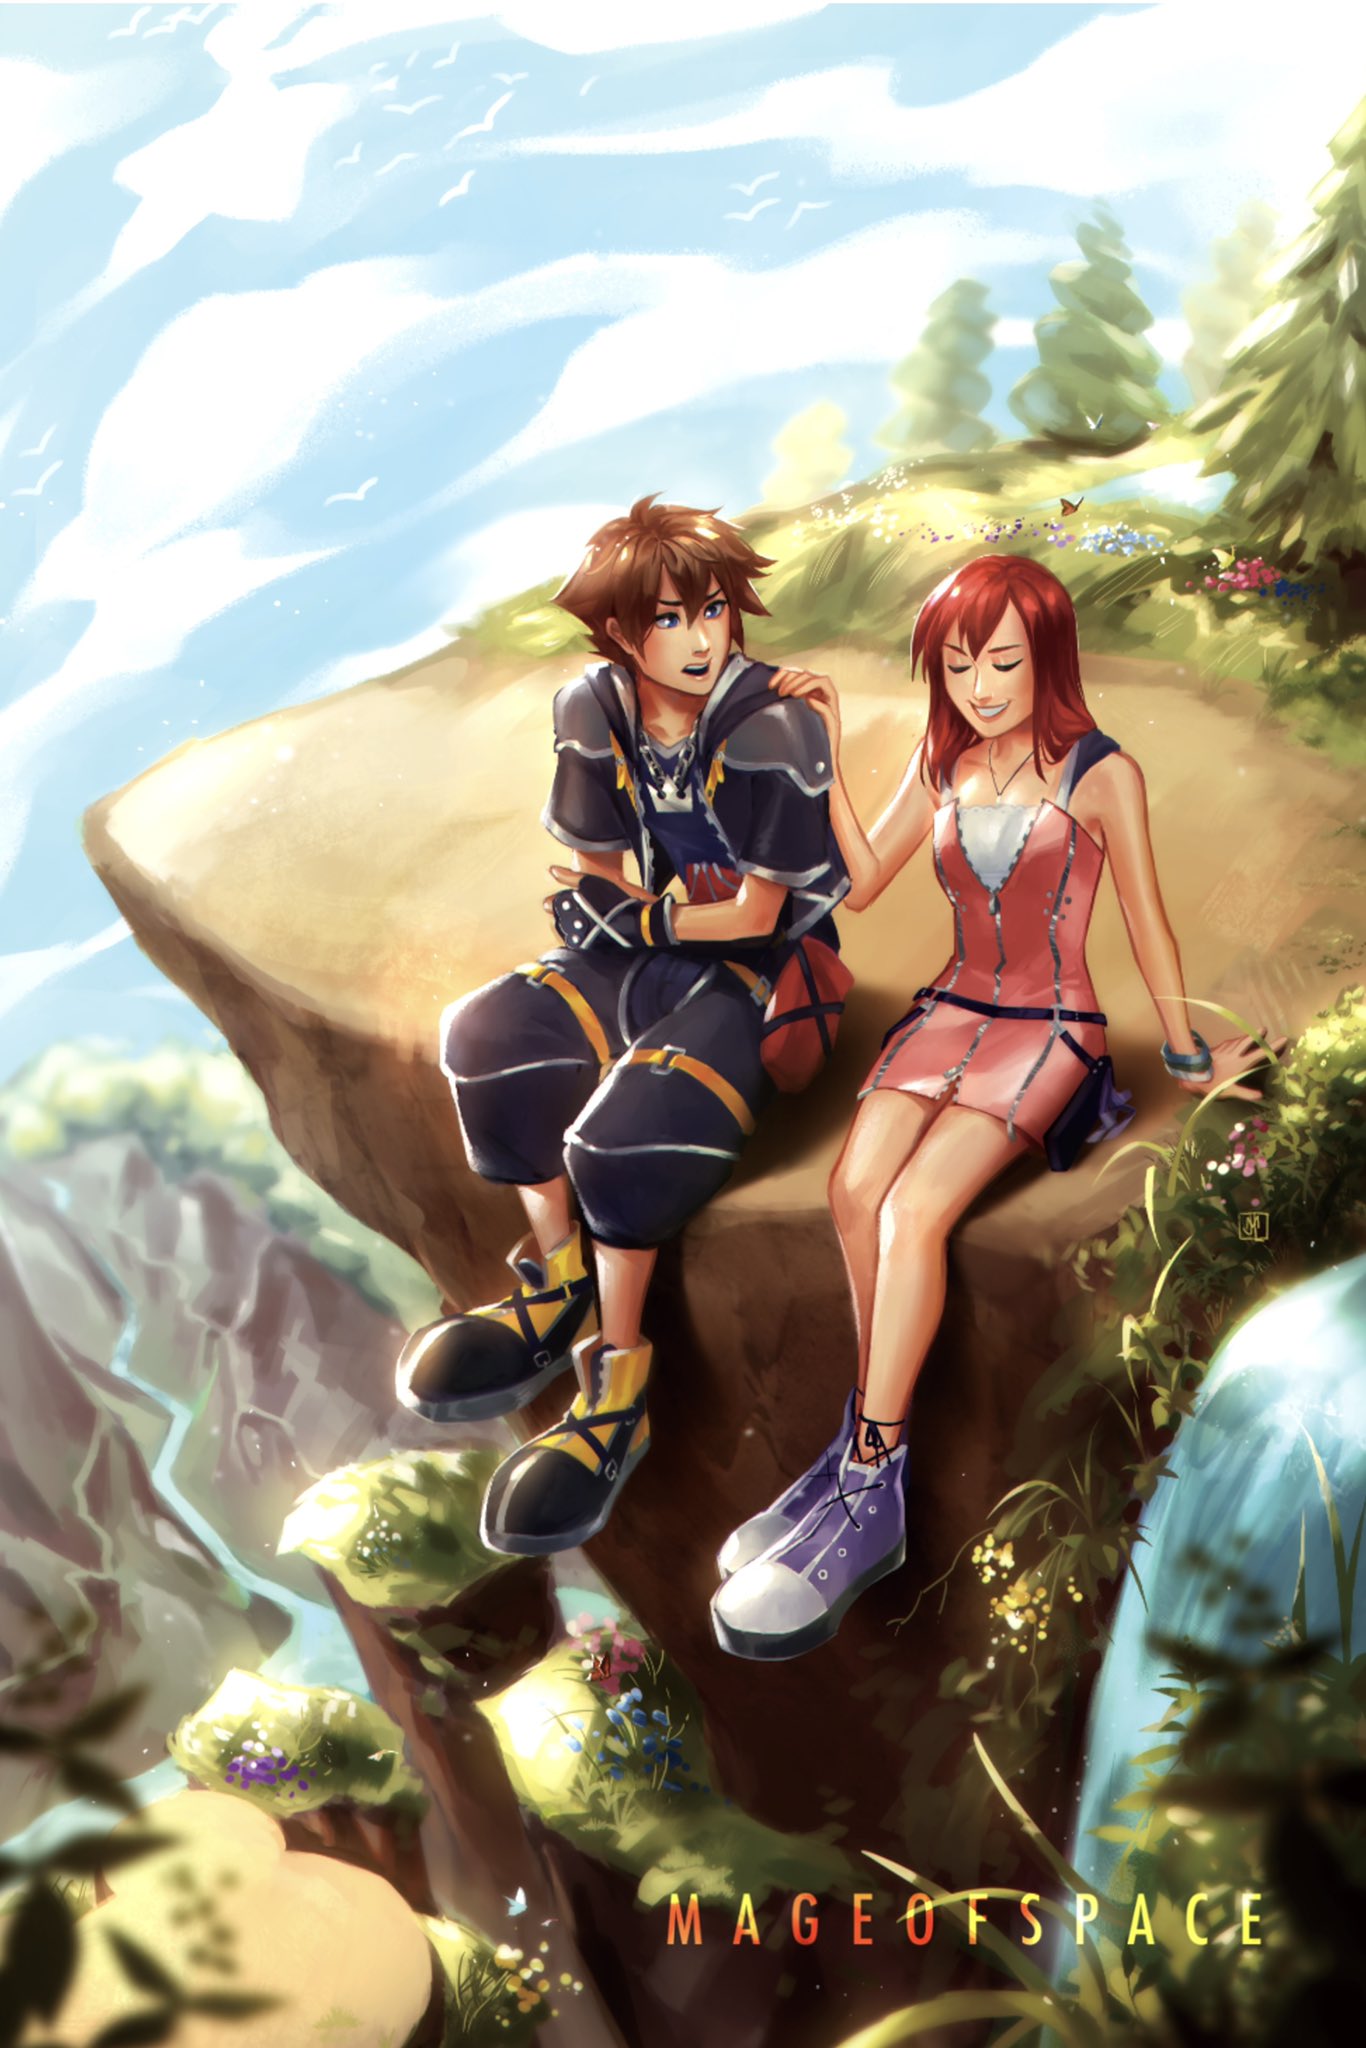 1boy 1girl artist_name bare_shoulders black_gloves breasts brown_hair chain_necklace cliff closed_eyes crossed_arms dress fingerless_gloves flock full_body gloves hair_between_eyes hand_on_another's_shoulder highres jewelry kairi_(kingdom_hearts) kingdom_hearts kingdom_hearts_ii looking_at_another mageofspace medium_hair nature necklace open_mouth outdoors pink_dress red_hair short_hair short_sleeves sitting sleeveless sleeveless_dress small_breasts smile sora_(kingdom_hearts) teeth water waterfall wristband